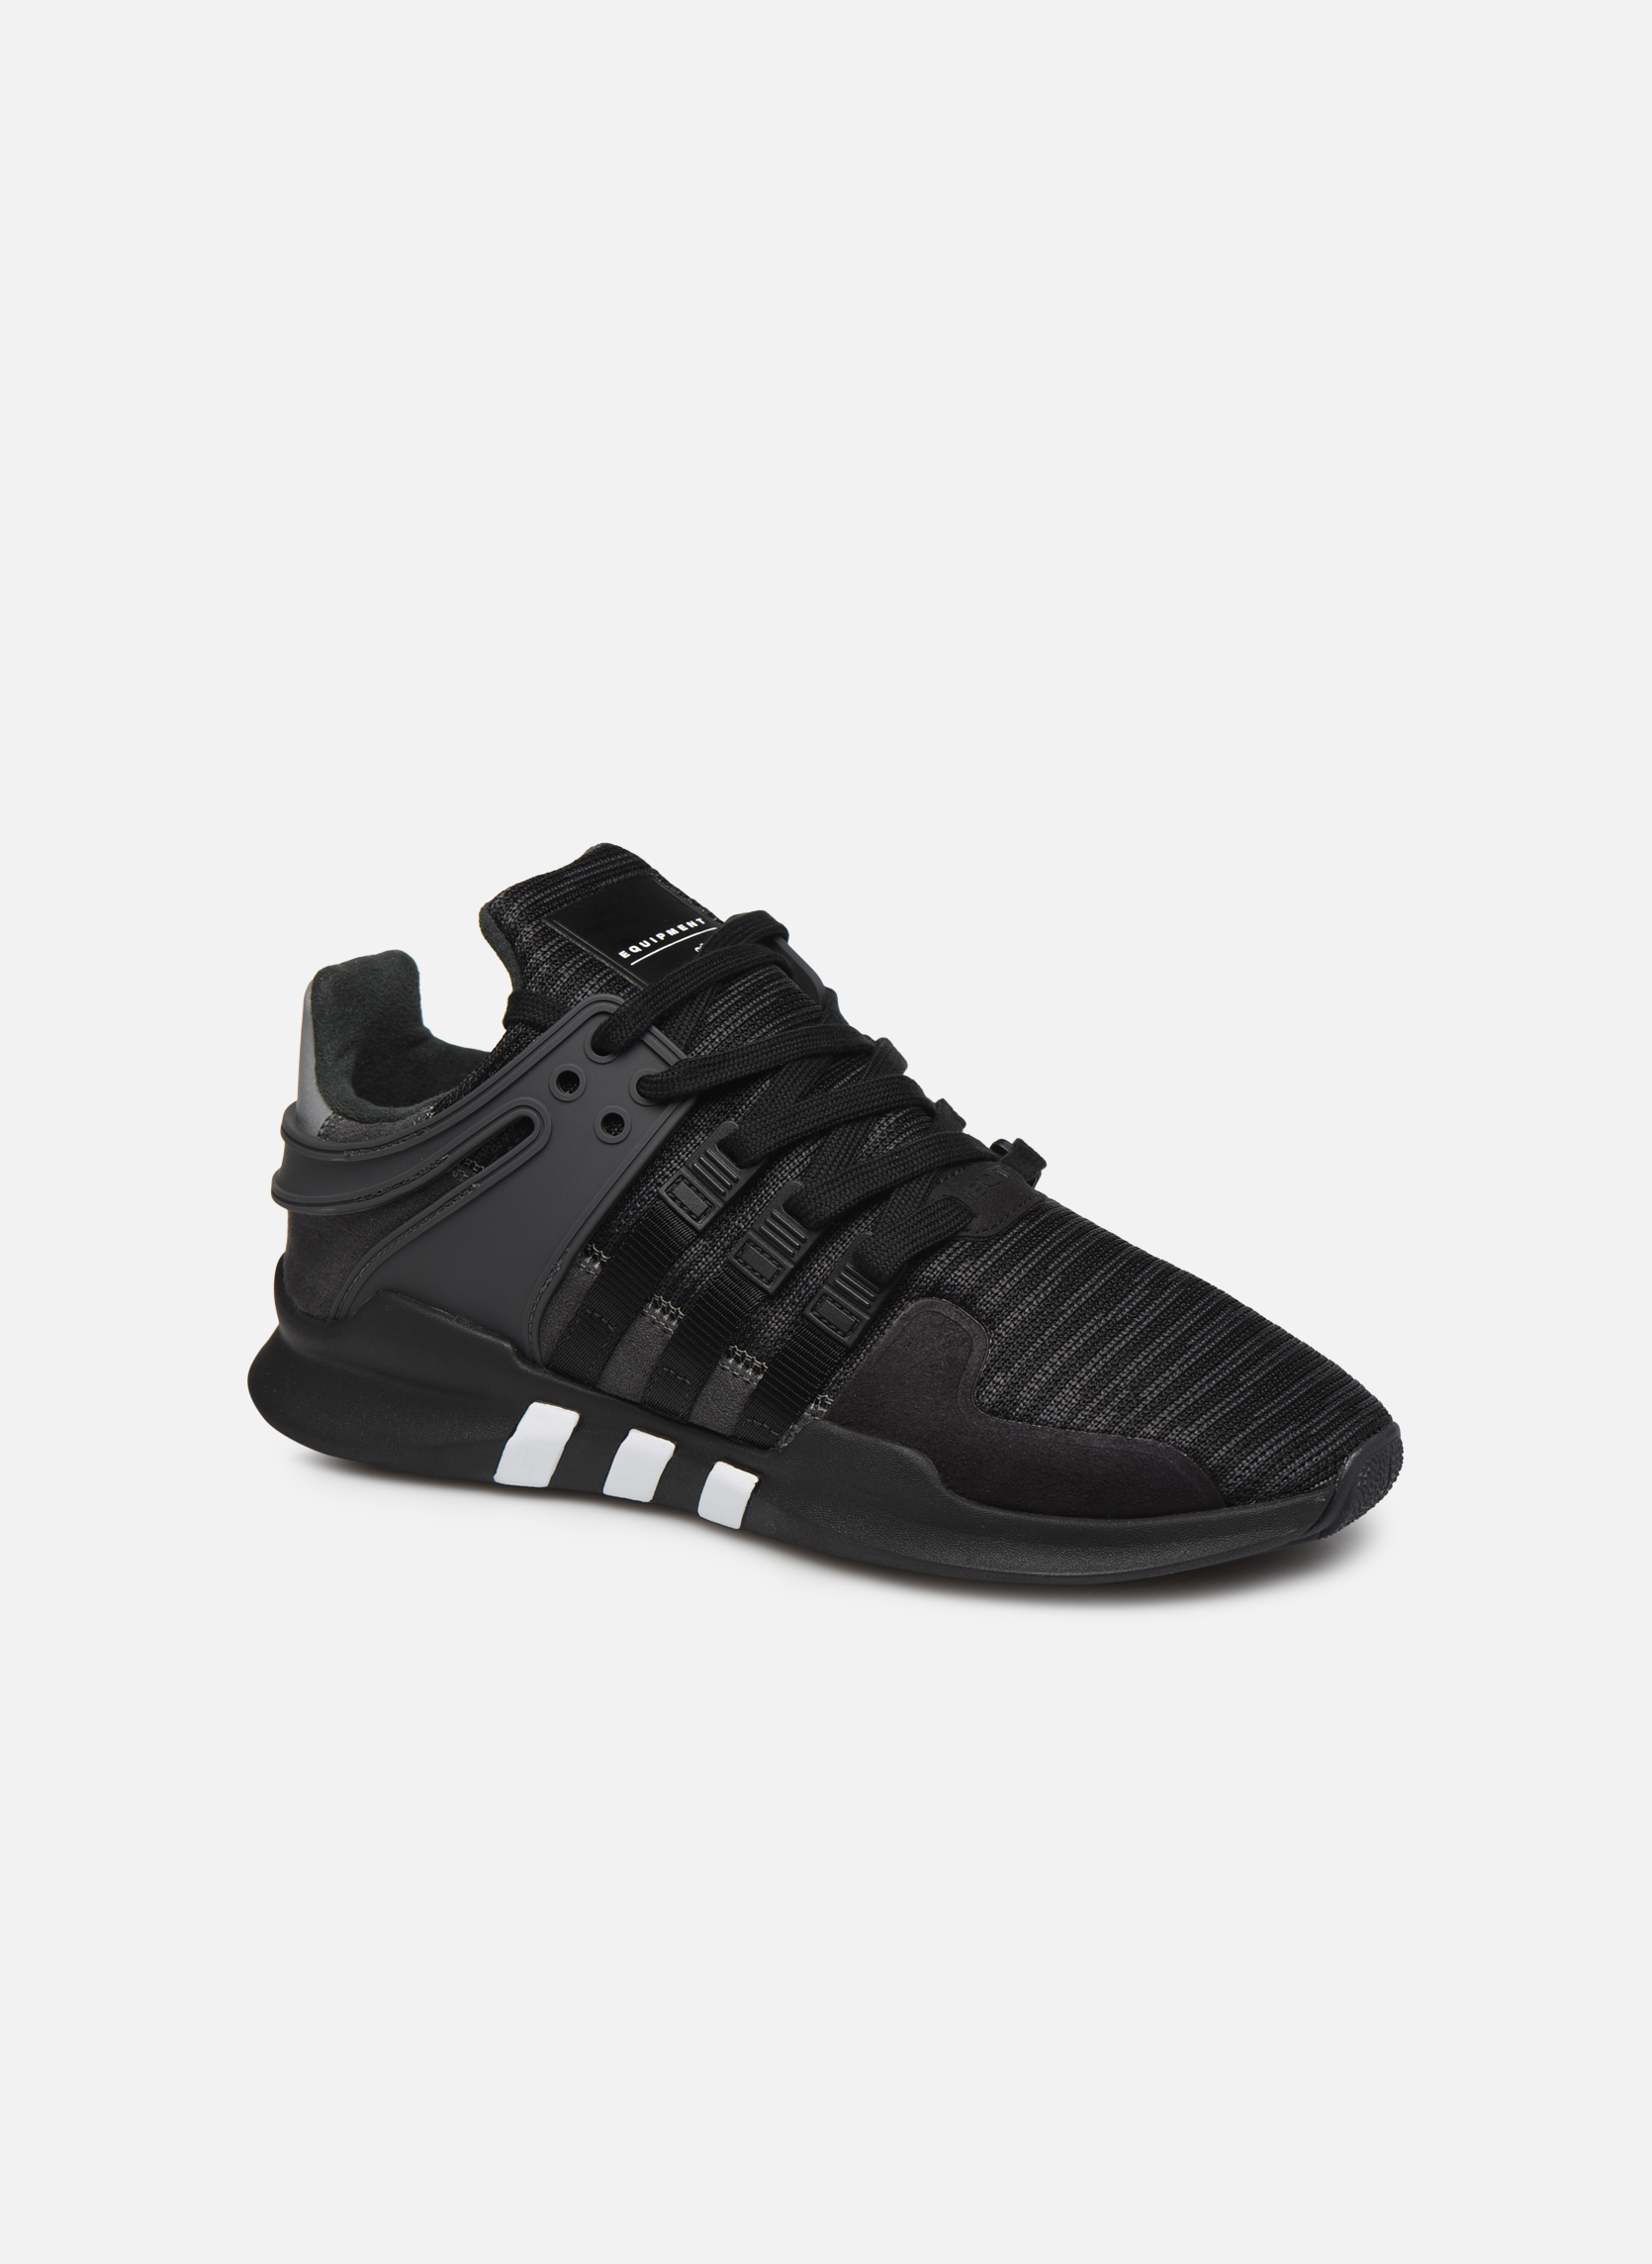 adidas eqt support sock homme france